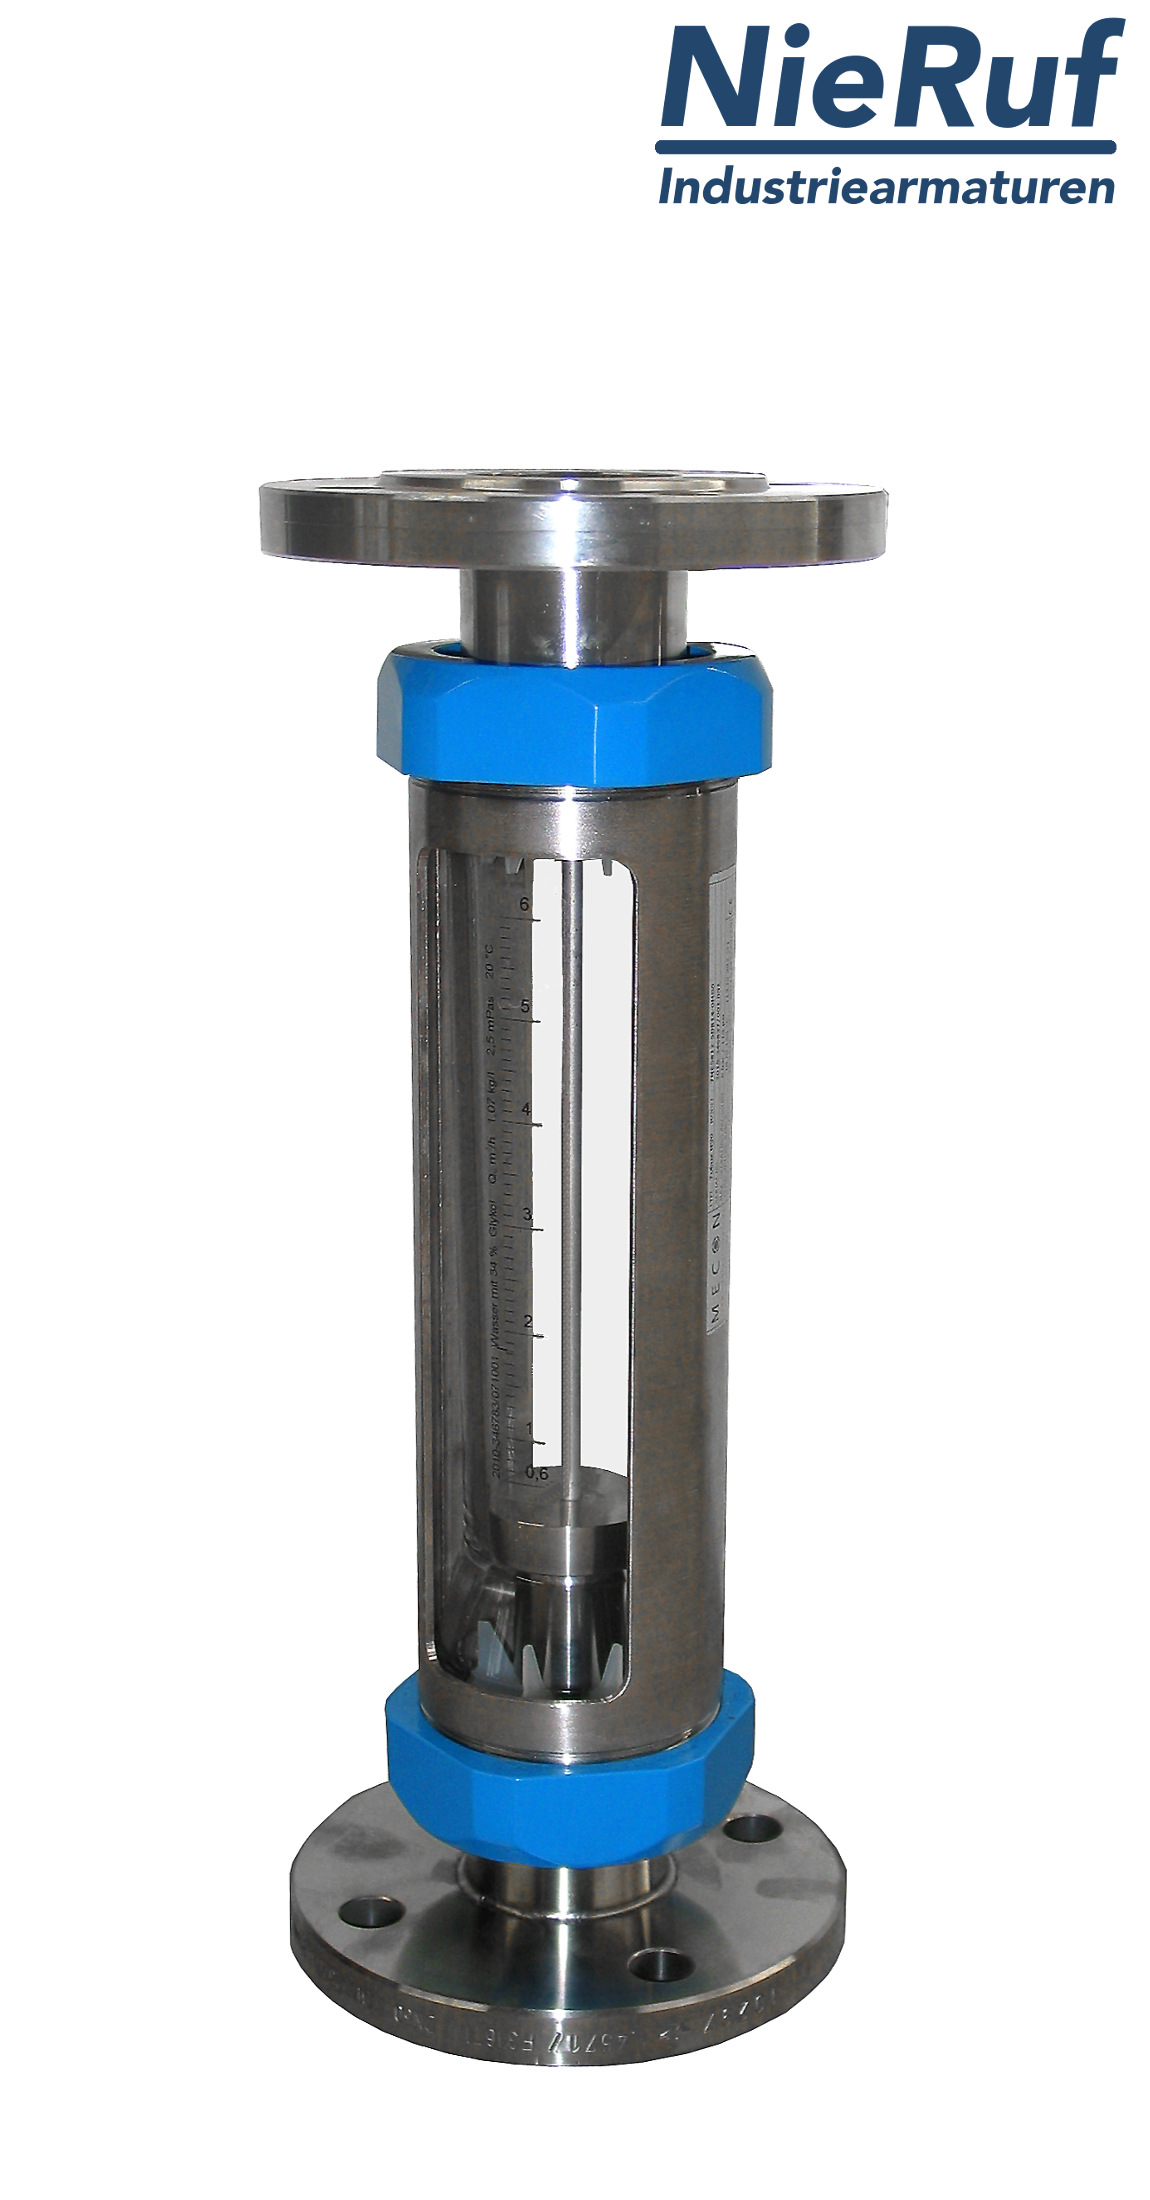 Variable area flowmeter stainless steel + borosilicate flange DN20 31.5 - 315.0 l/h water FKM